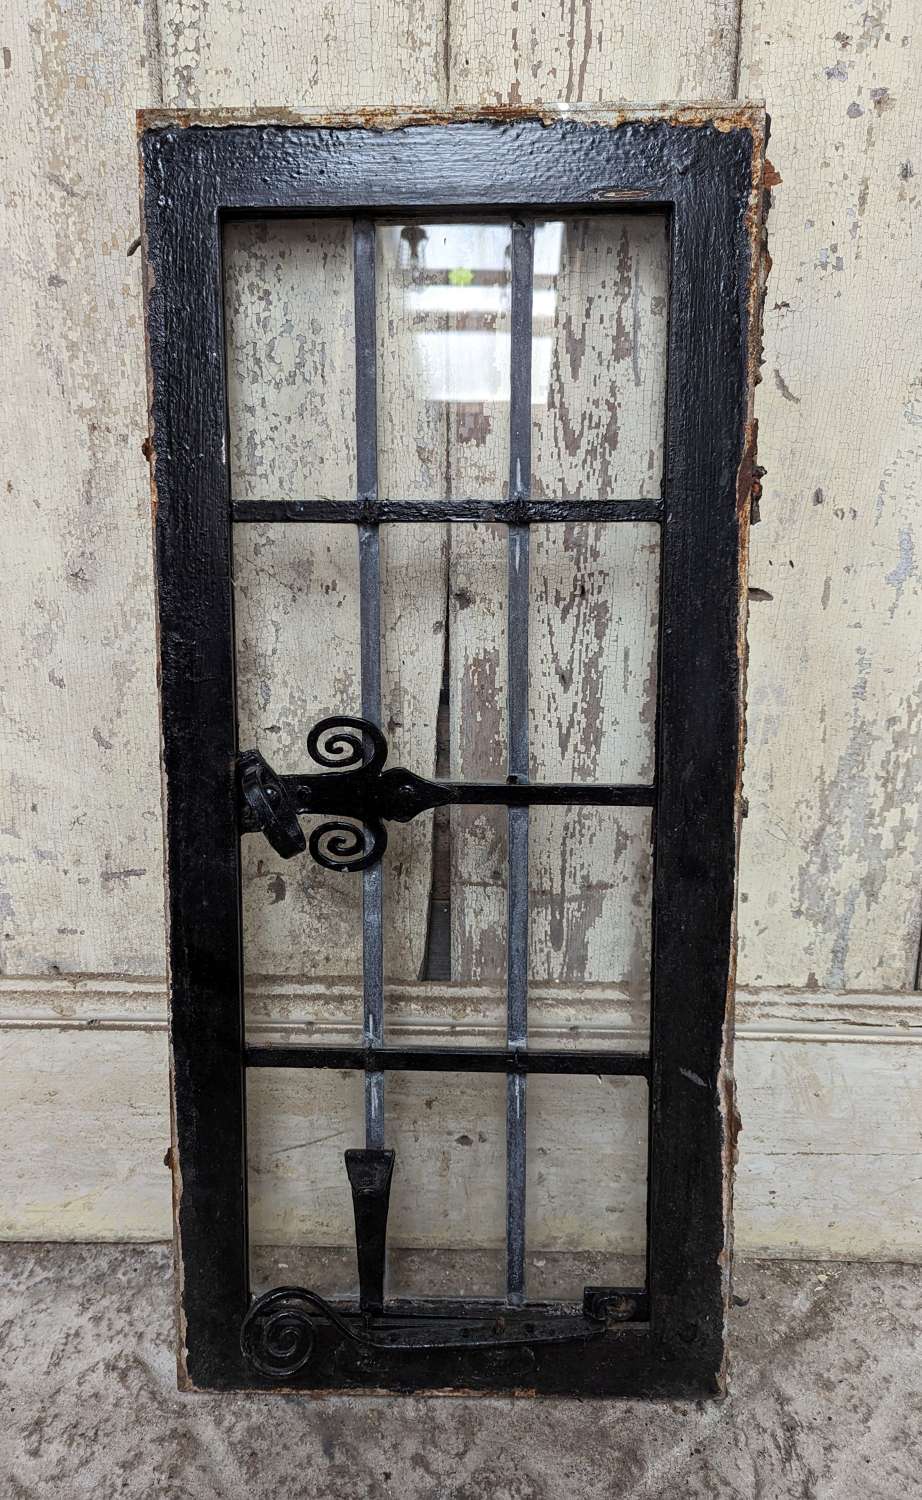 M1835 A RECLAIMED METAL ARTS AND CRAFTS STYLE OPENING WINDOW